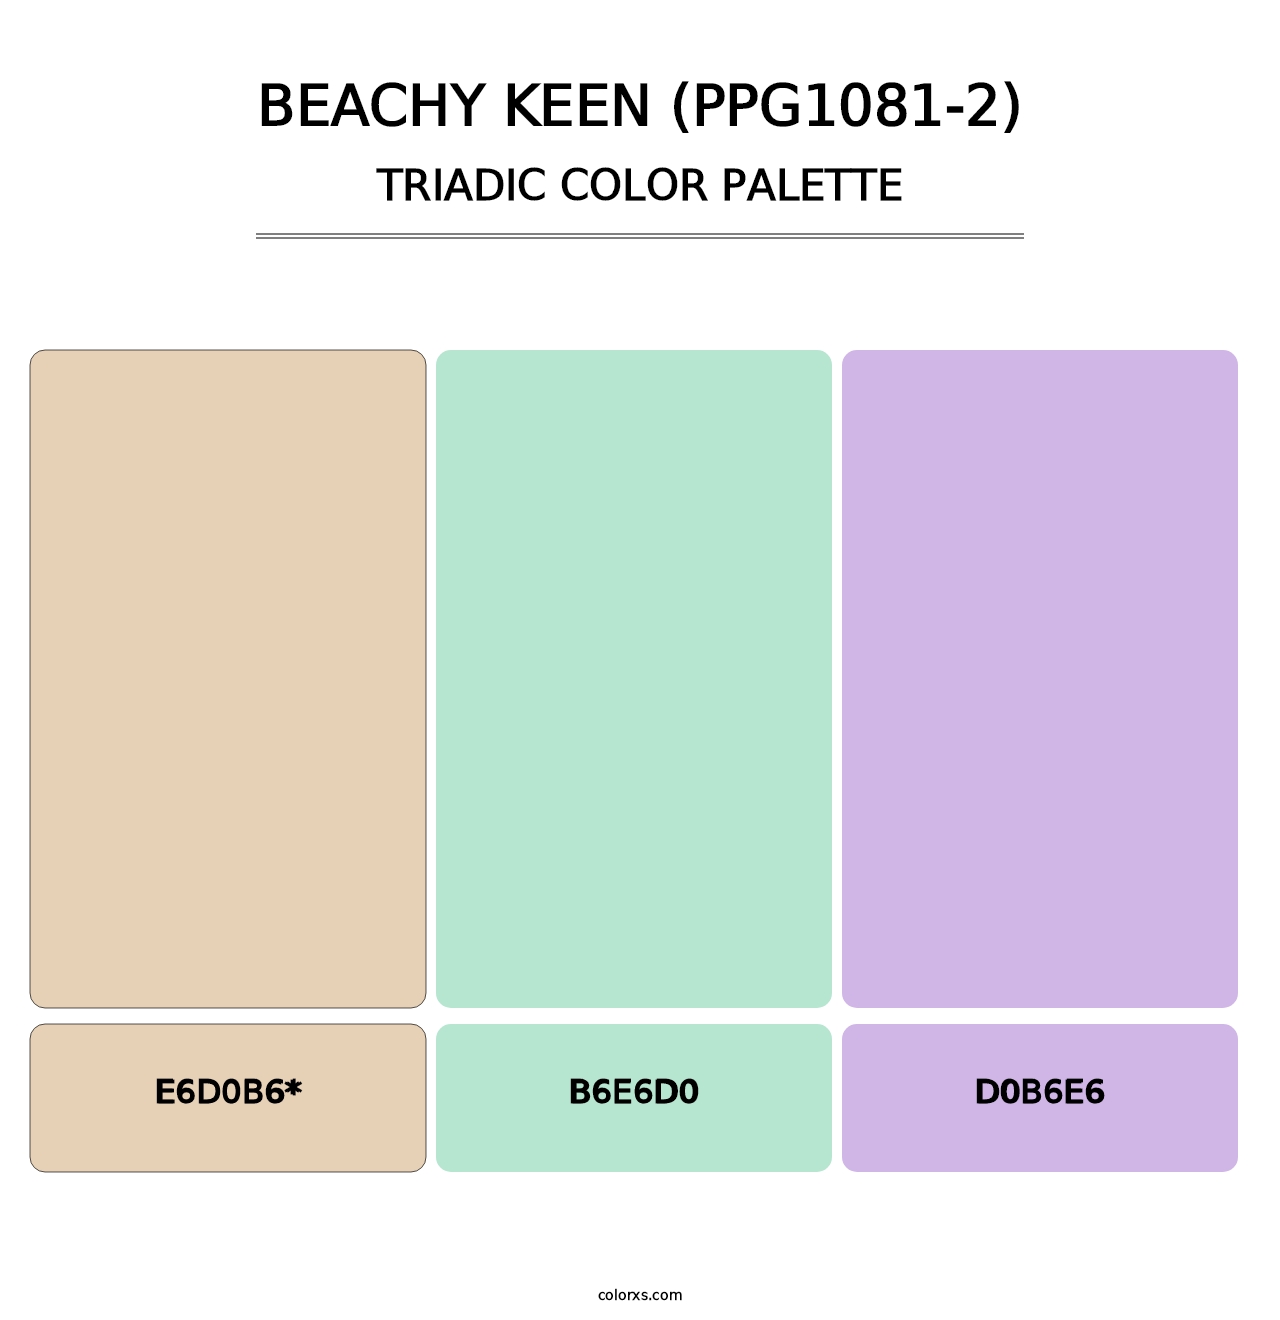 Beachy Keen (PPG1081-2) - Triadic Color Palette